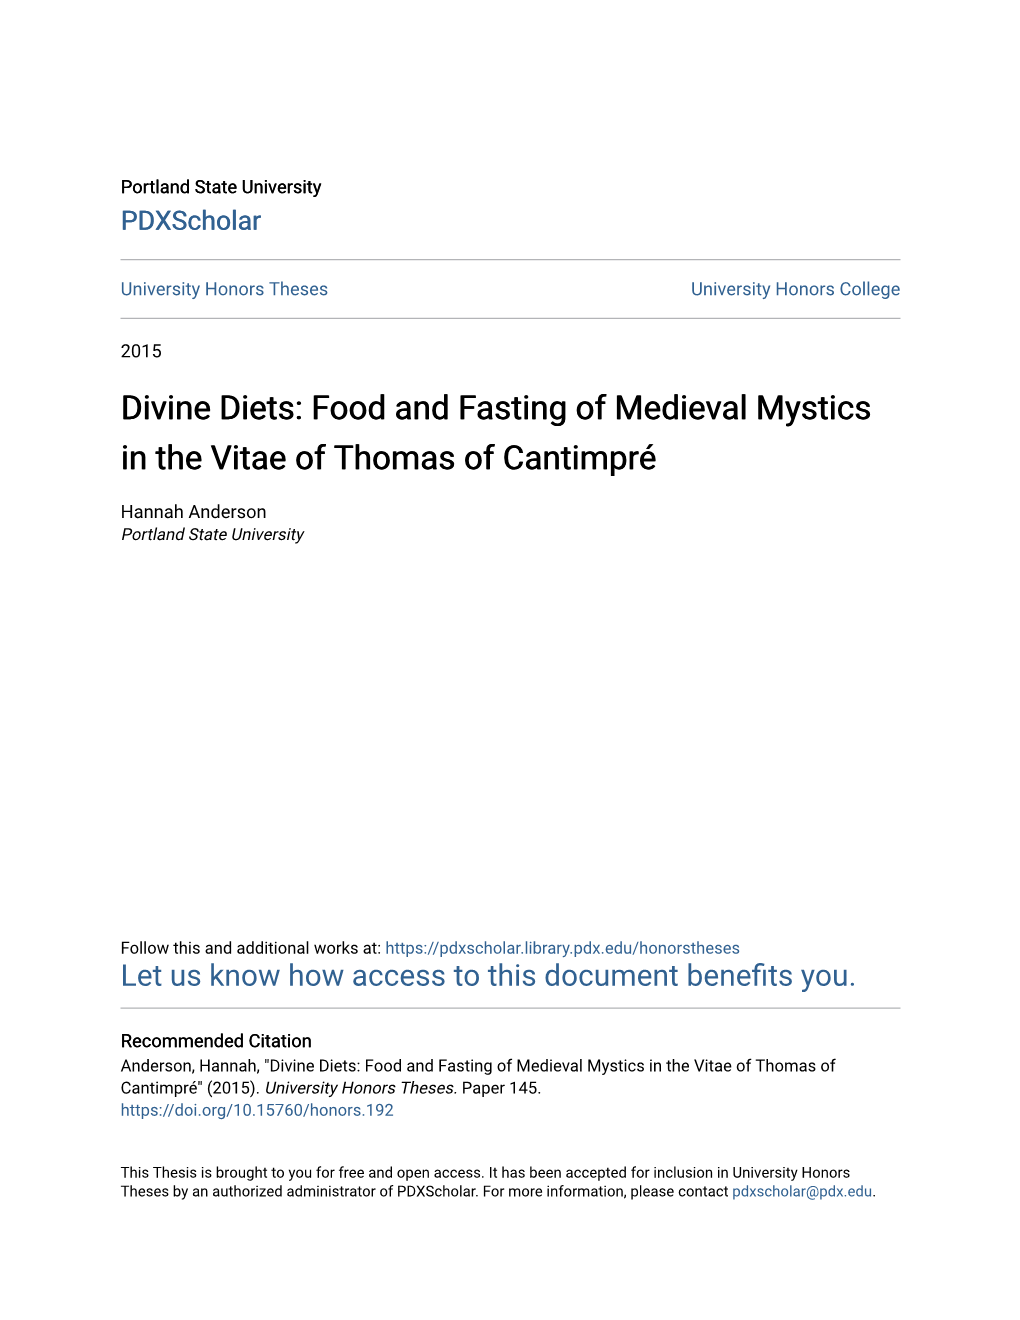 Divine Diets: Food and Fasting of Medieval Mystics in the Vitae of Thomas of Cantimpré